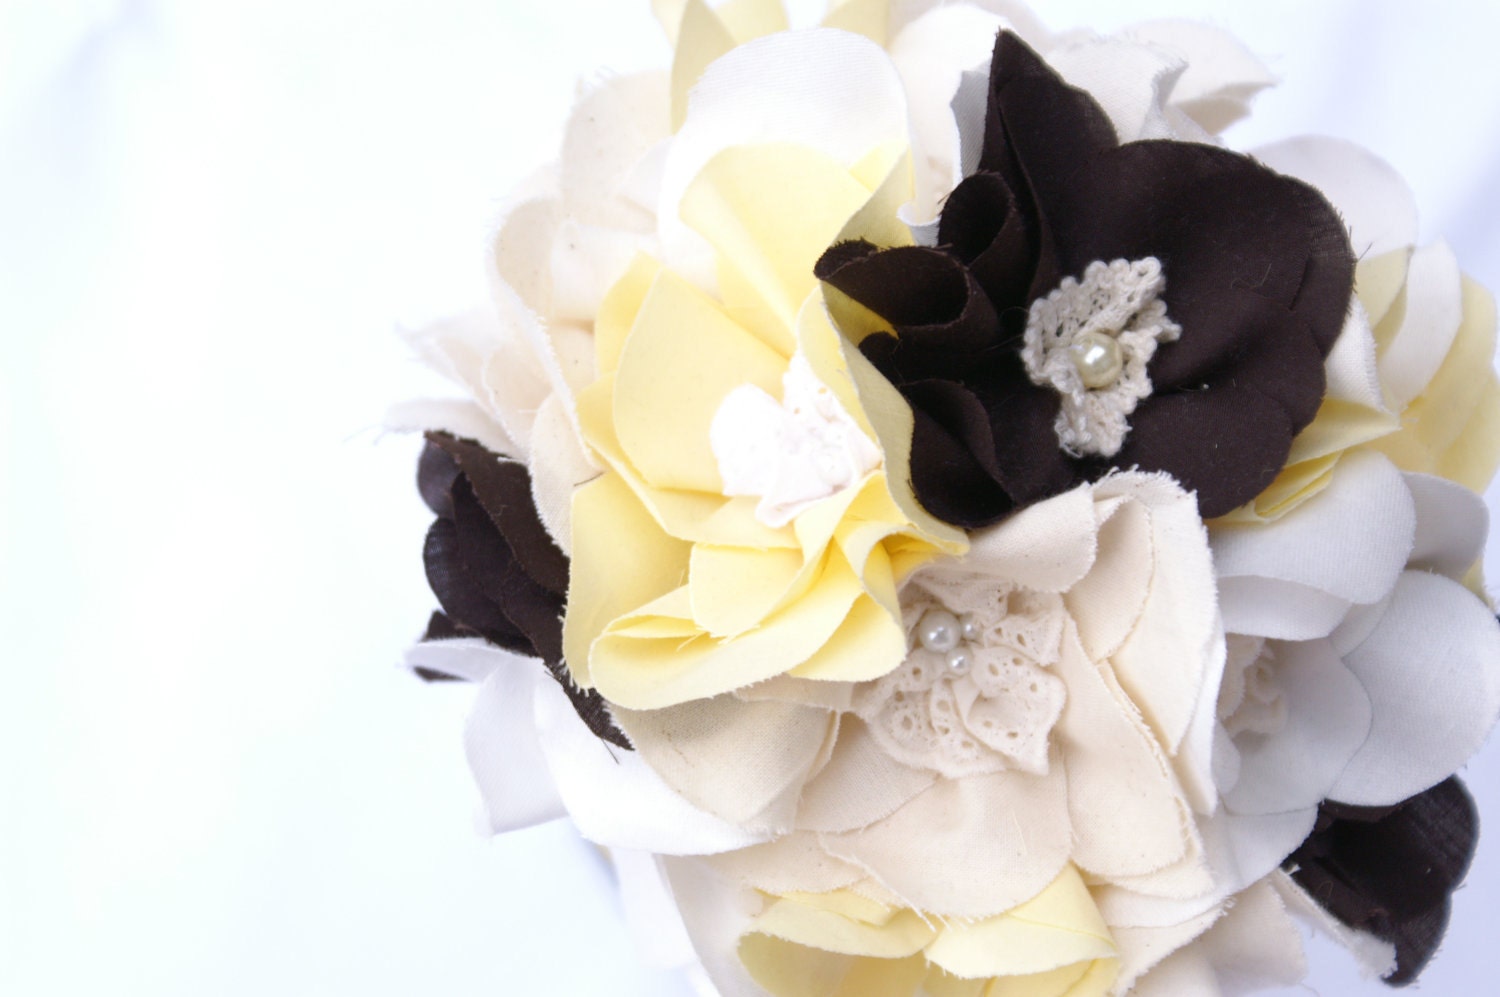 Fabric bridal bouquet, Handmade weddings, Flowers, Yellow and brown, Cotton magnolias, Ready to ship